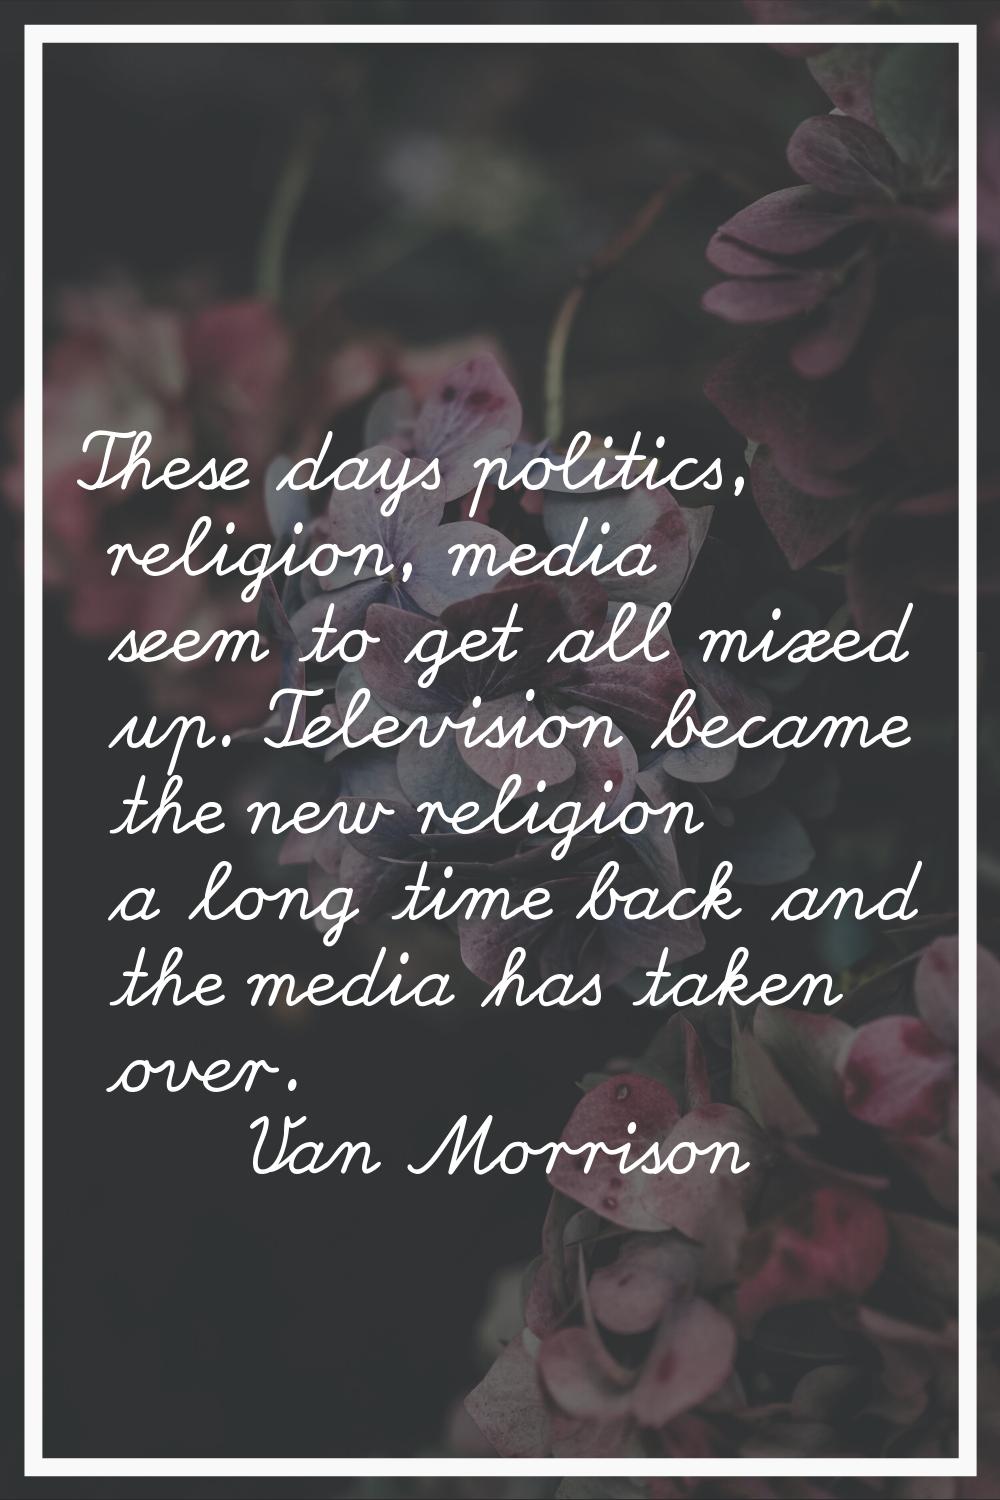 These days politics, religion, media seem to get all mixed up. Television became the new religion a